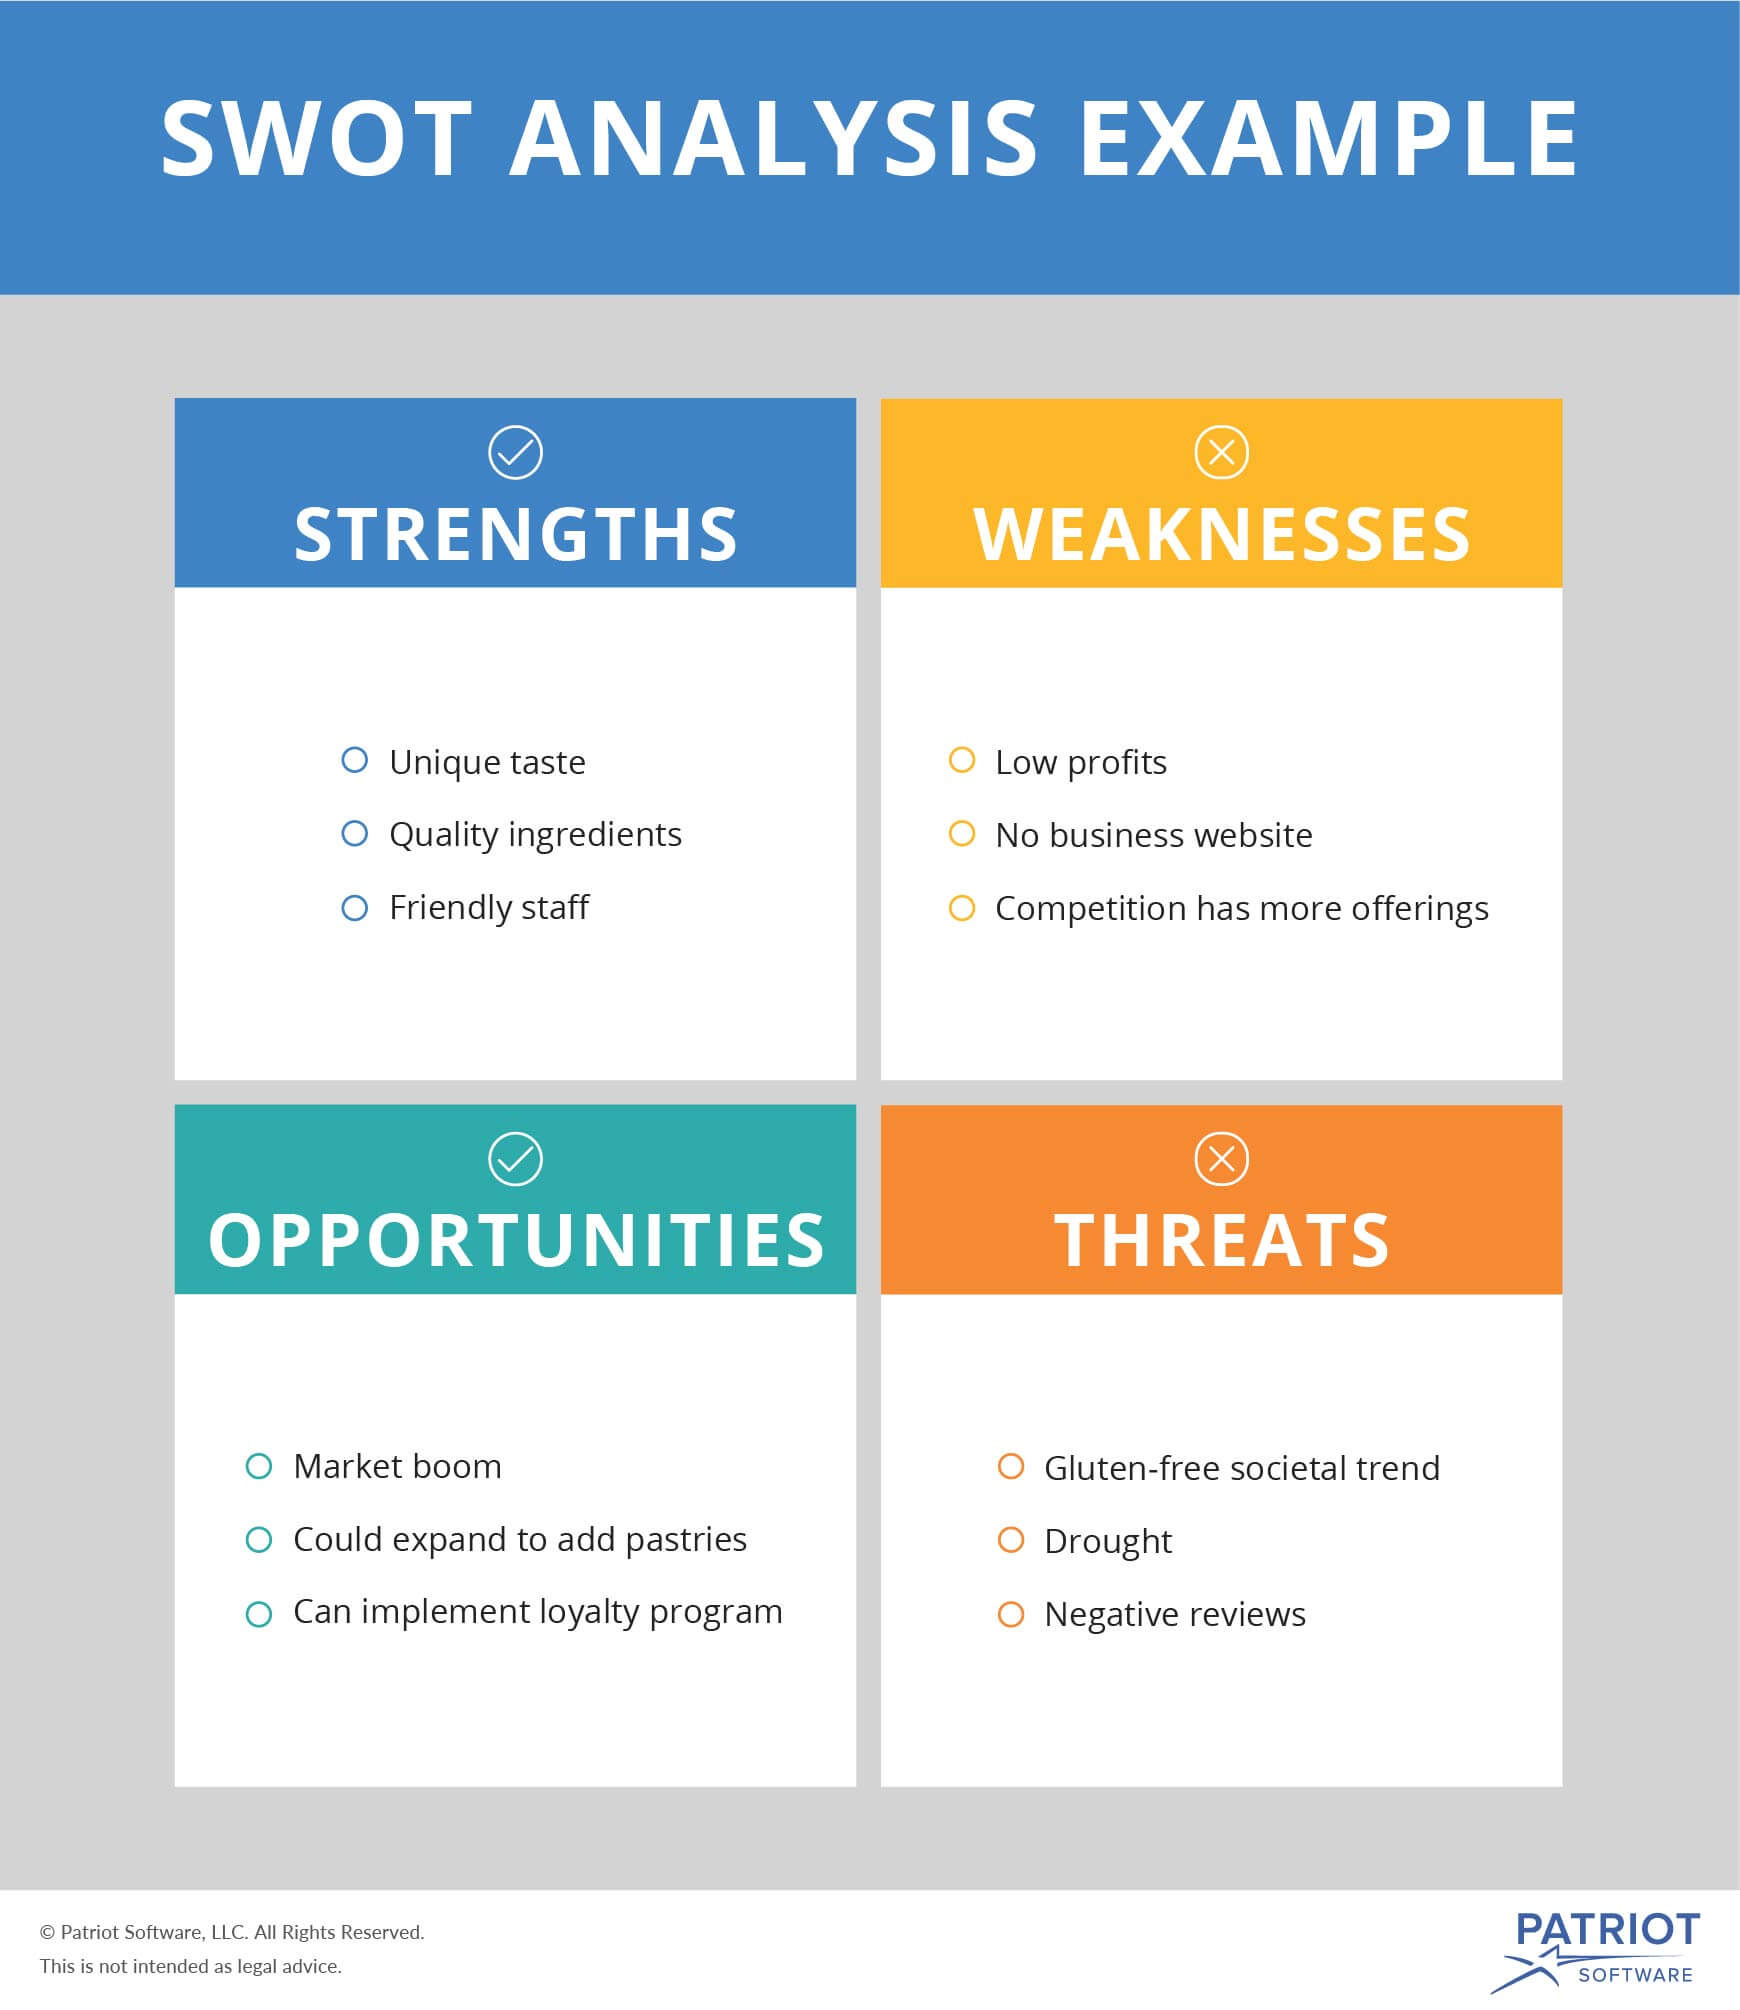 How to Create and Use a SWOT Analysis for Small Business